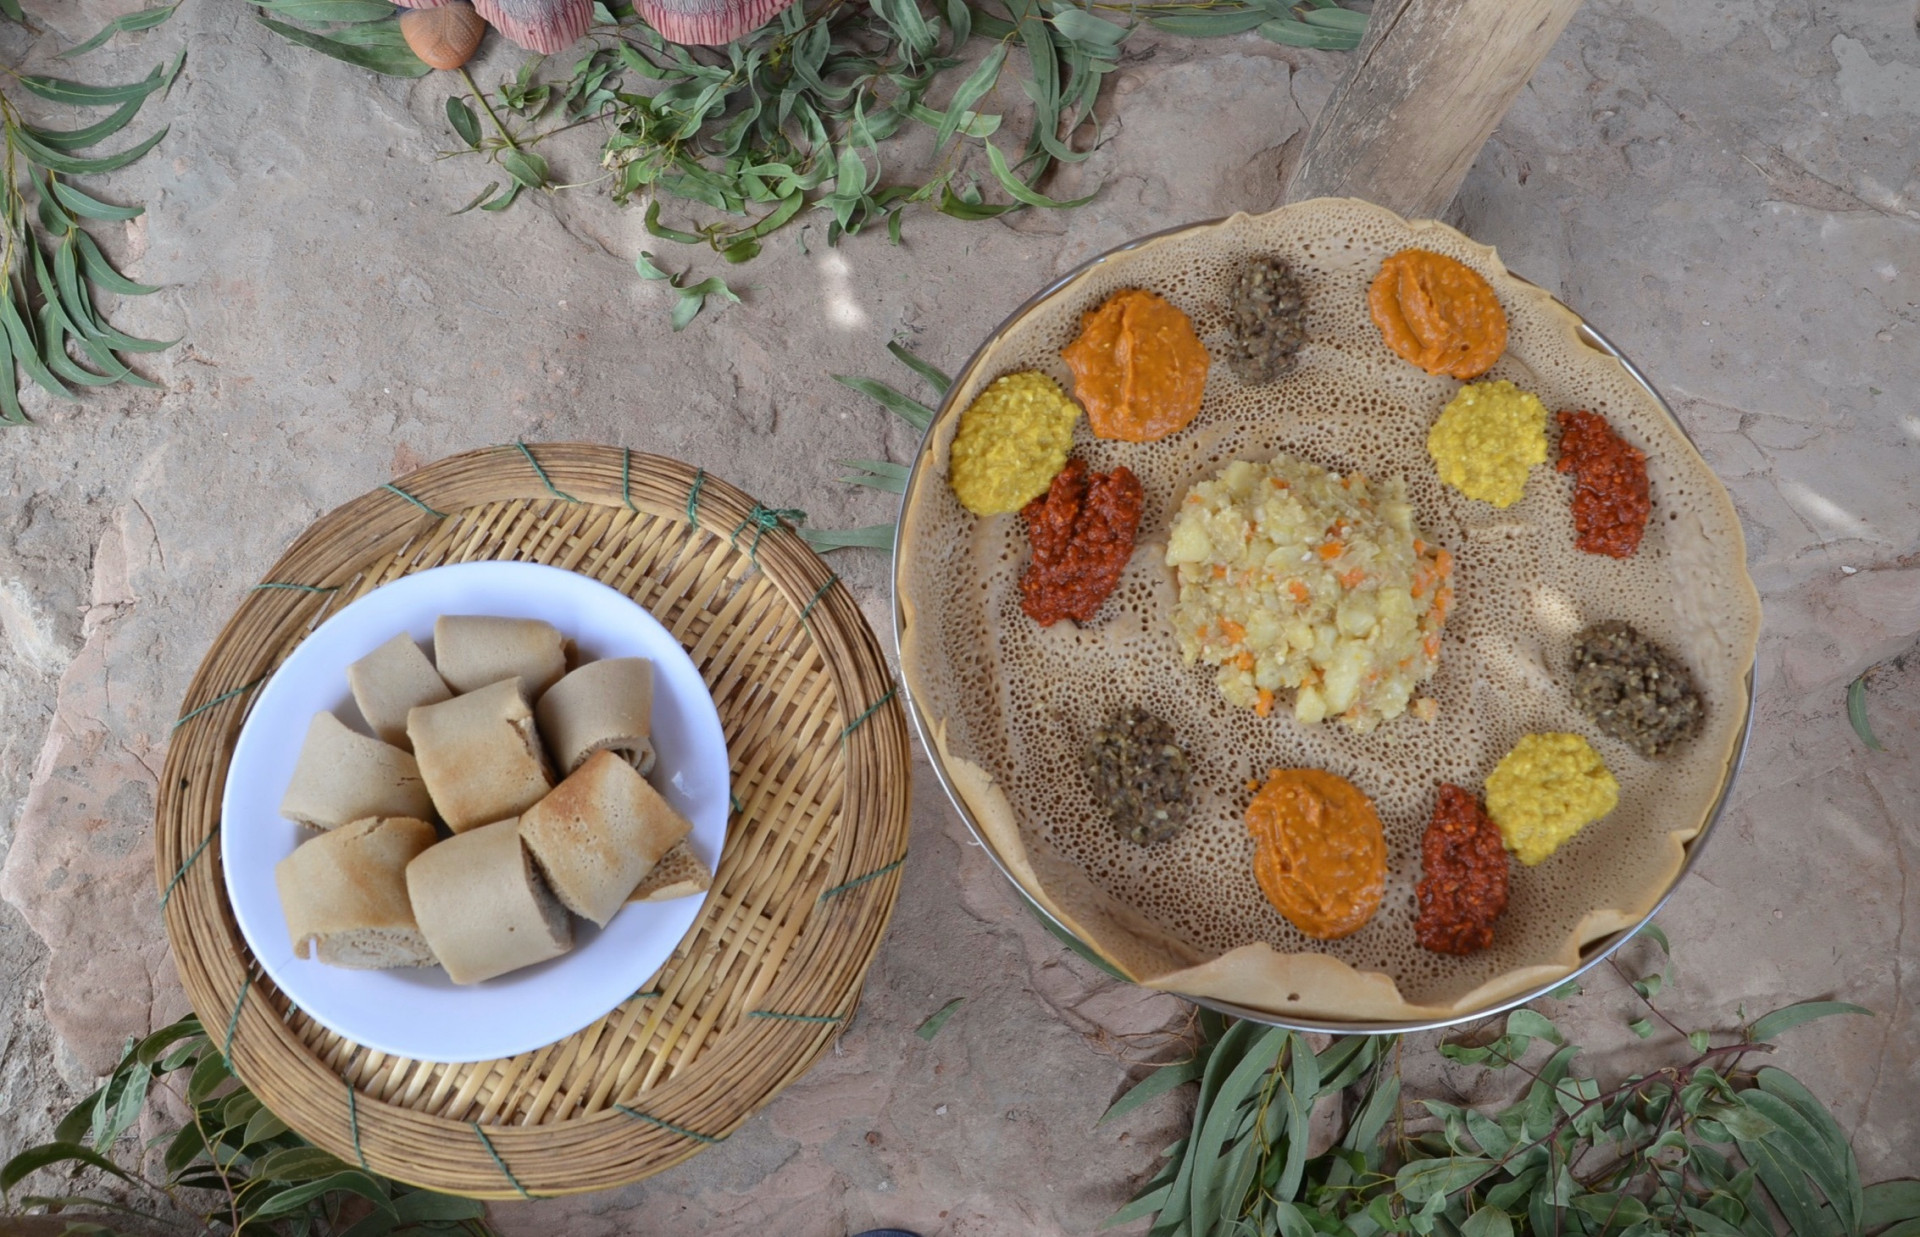 Injera, a traditional Ethiopian/Eritrean dish made with teff or sorghum flour